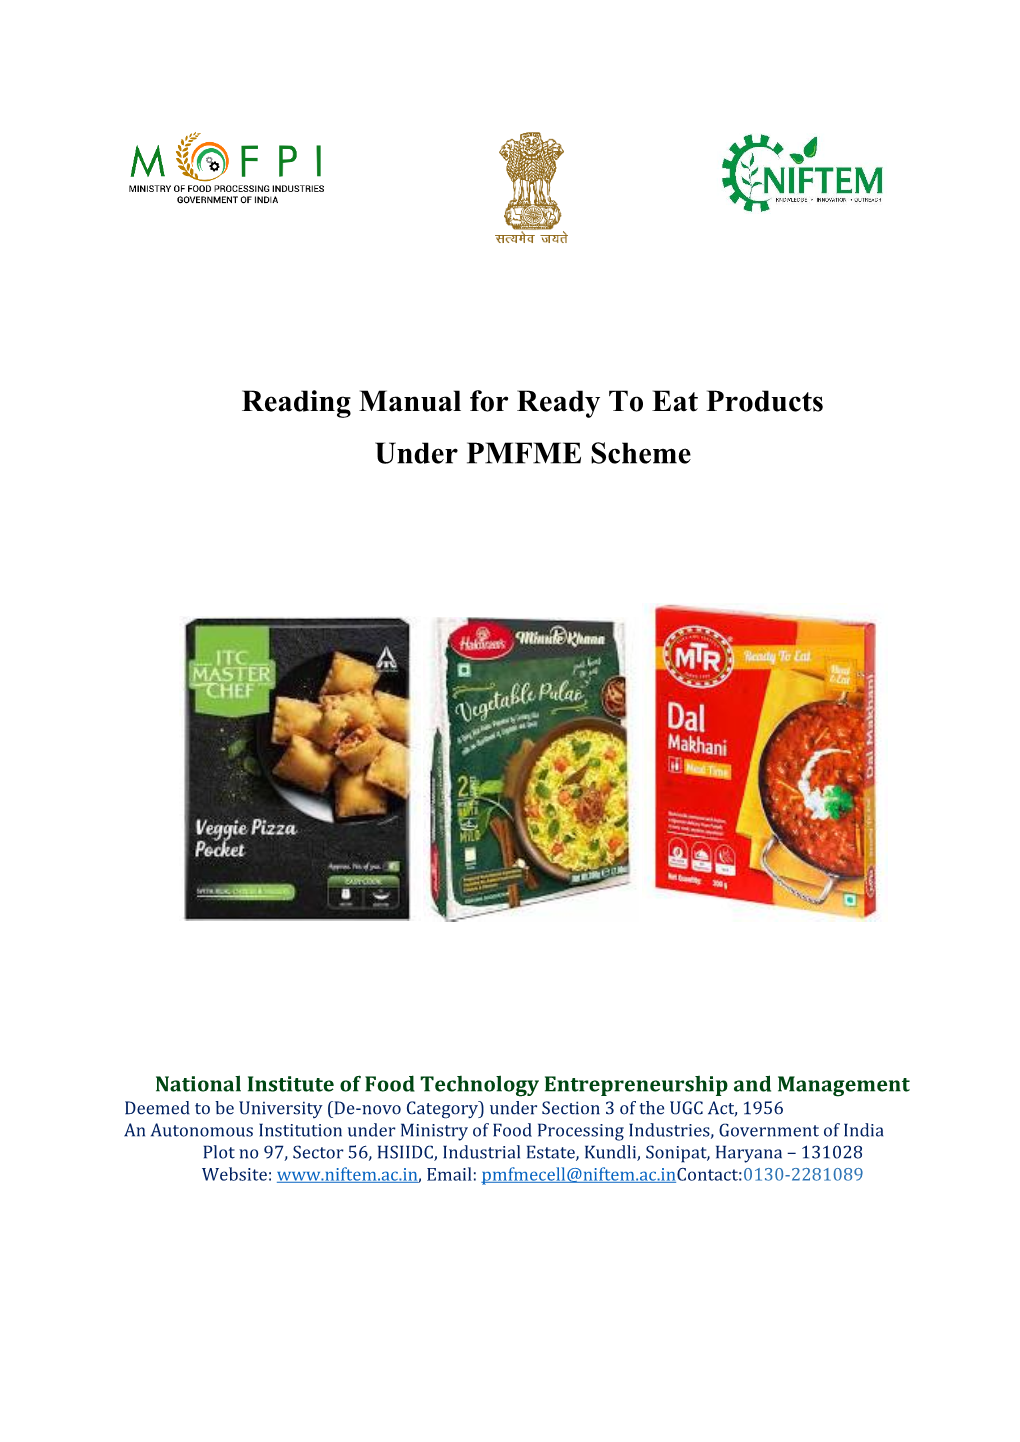 Reading Manual for Ready to Eat Products Under PMFME Scheme